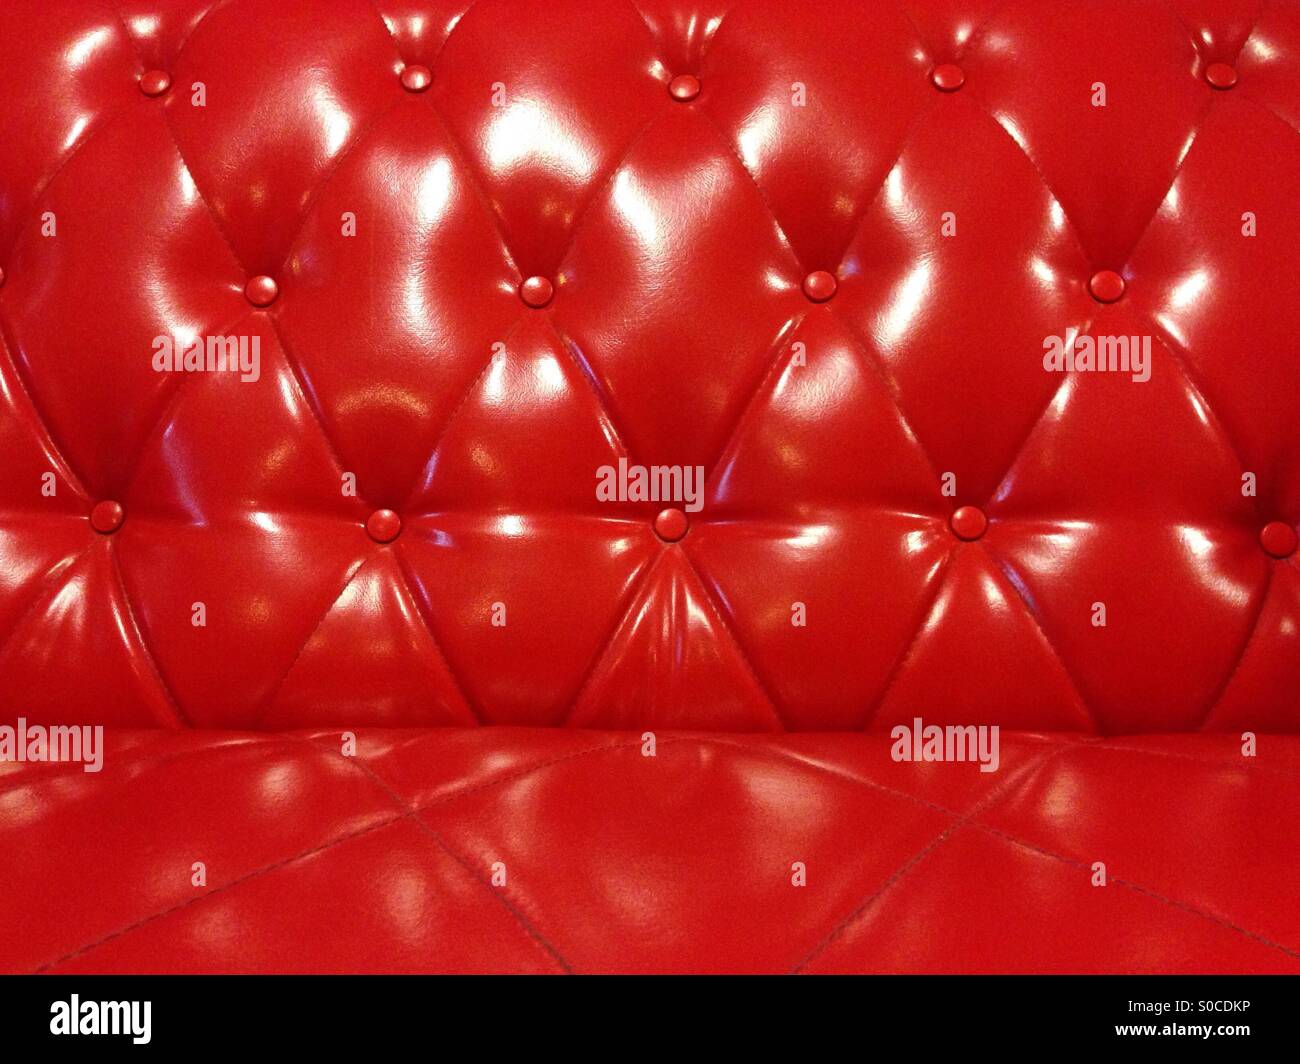 Glossy red leather sofa background Stock Photo